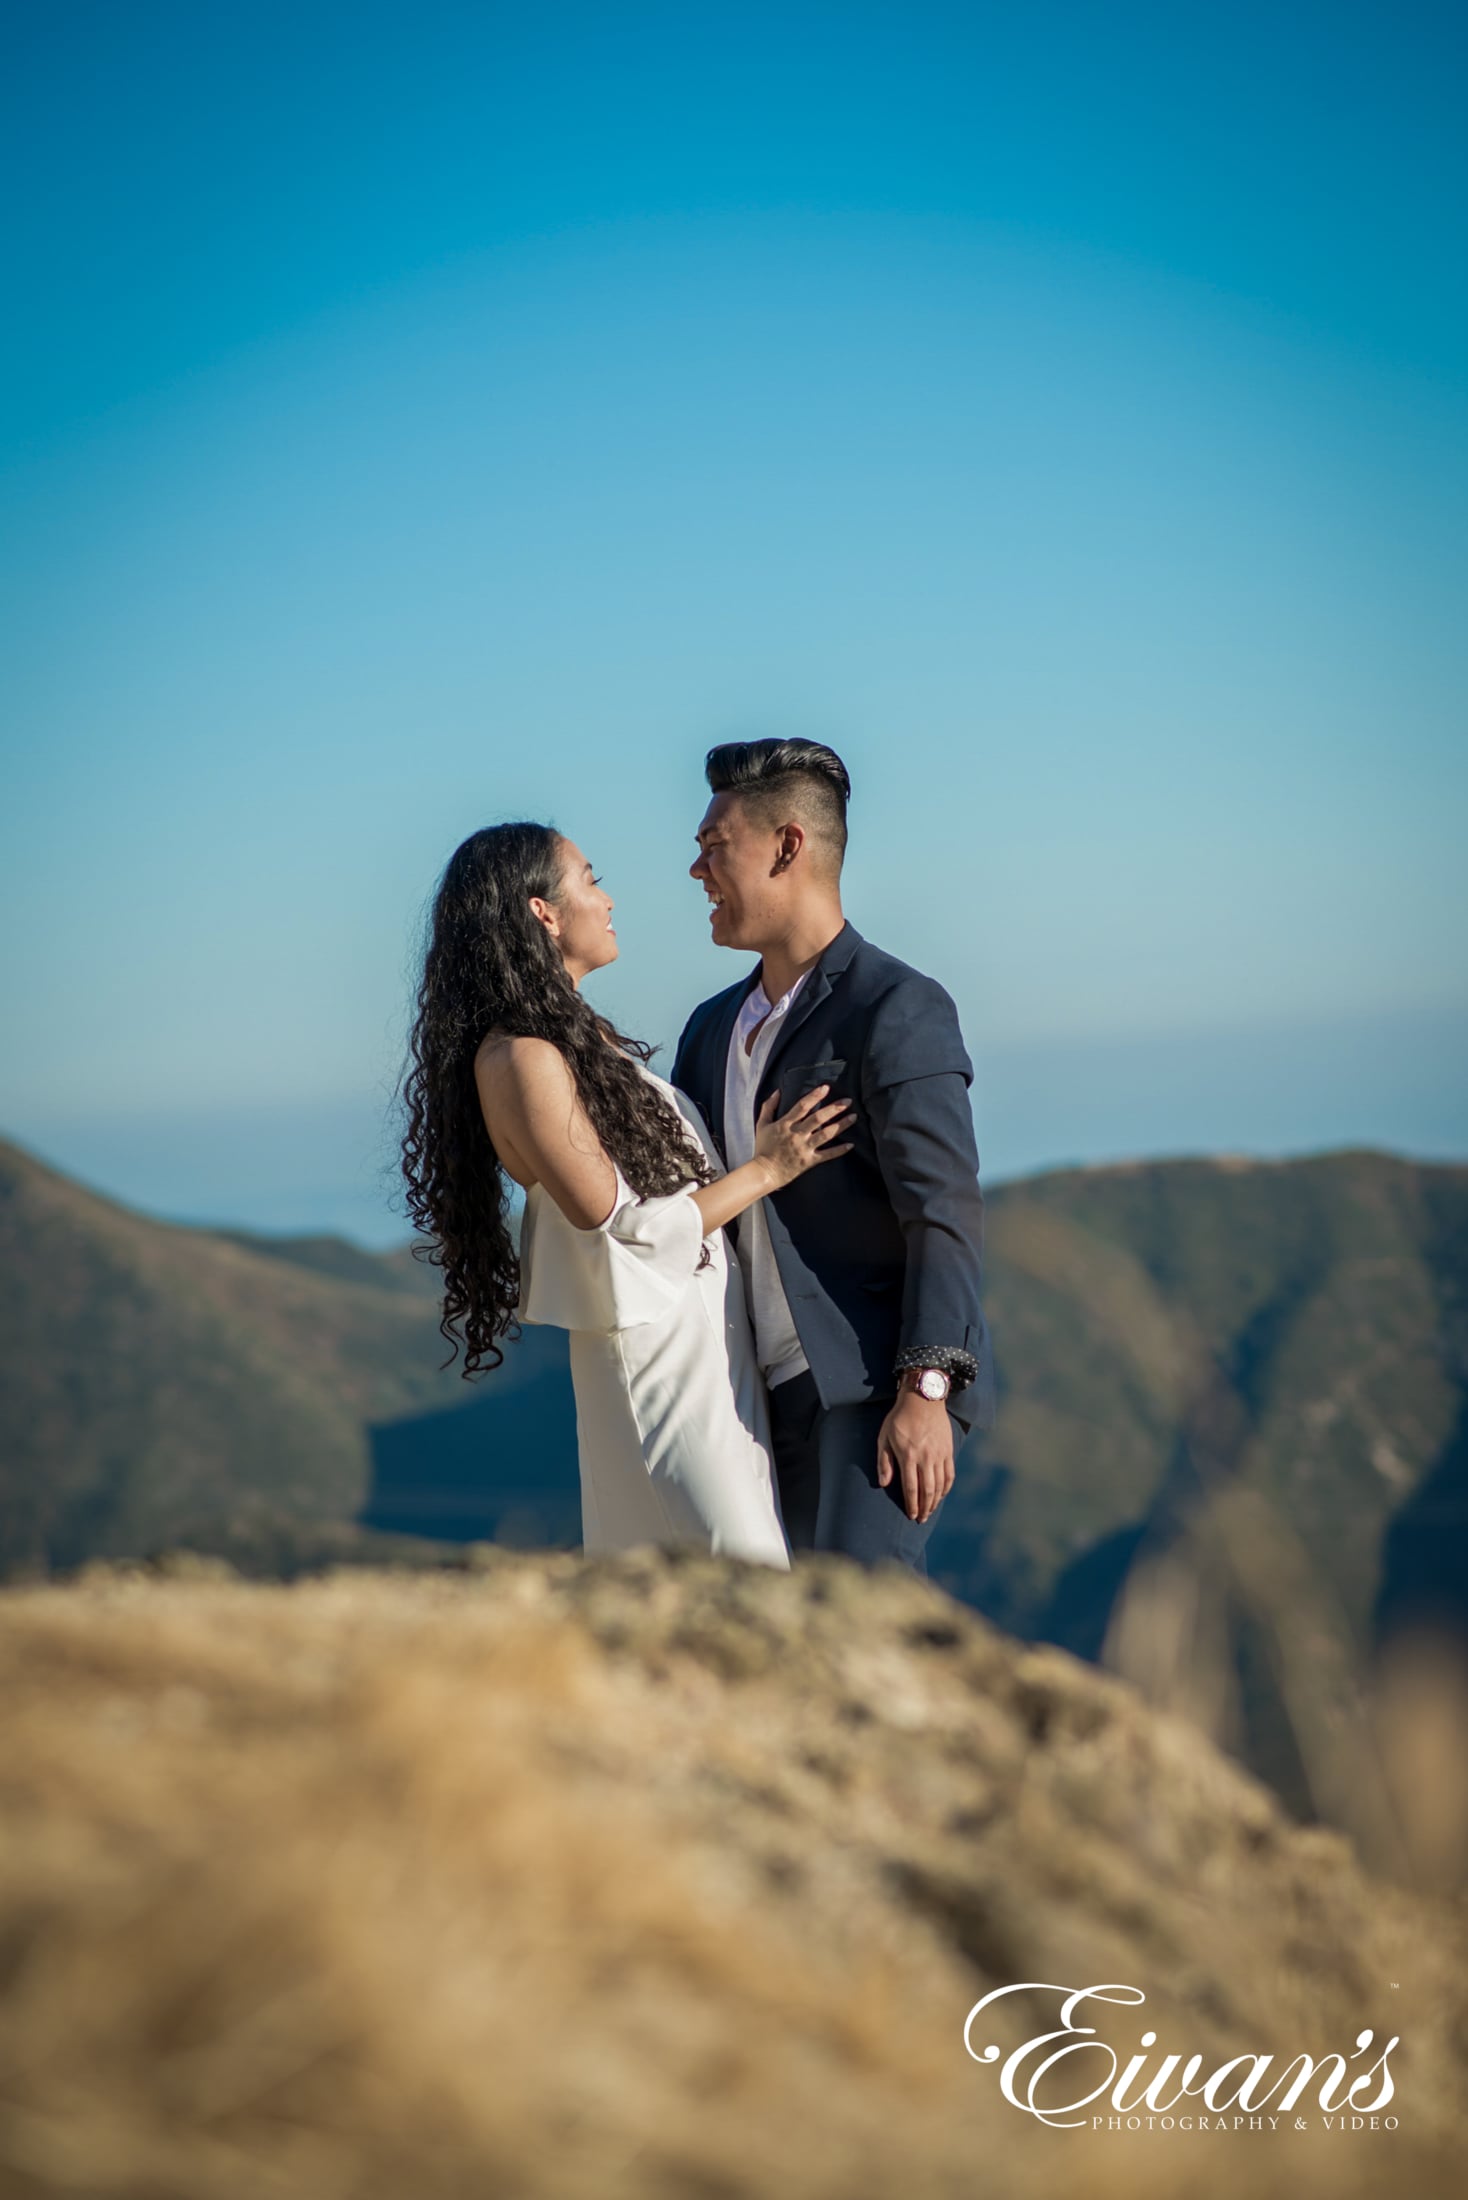 image of a couple on the mountains